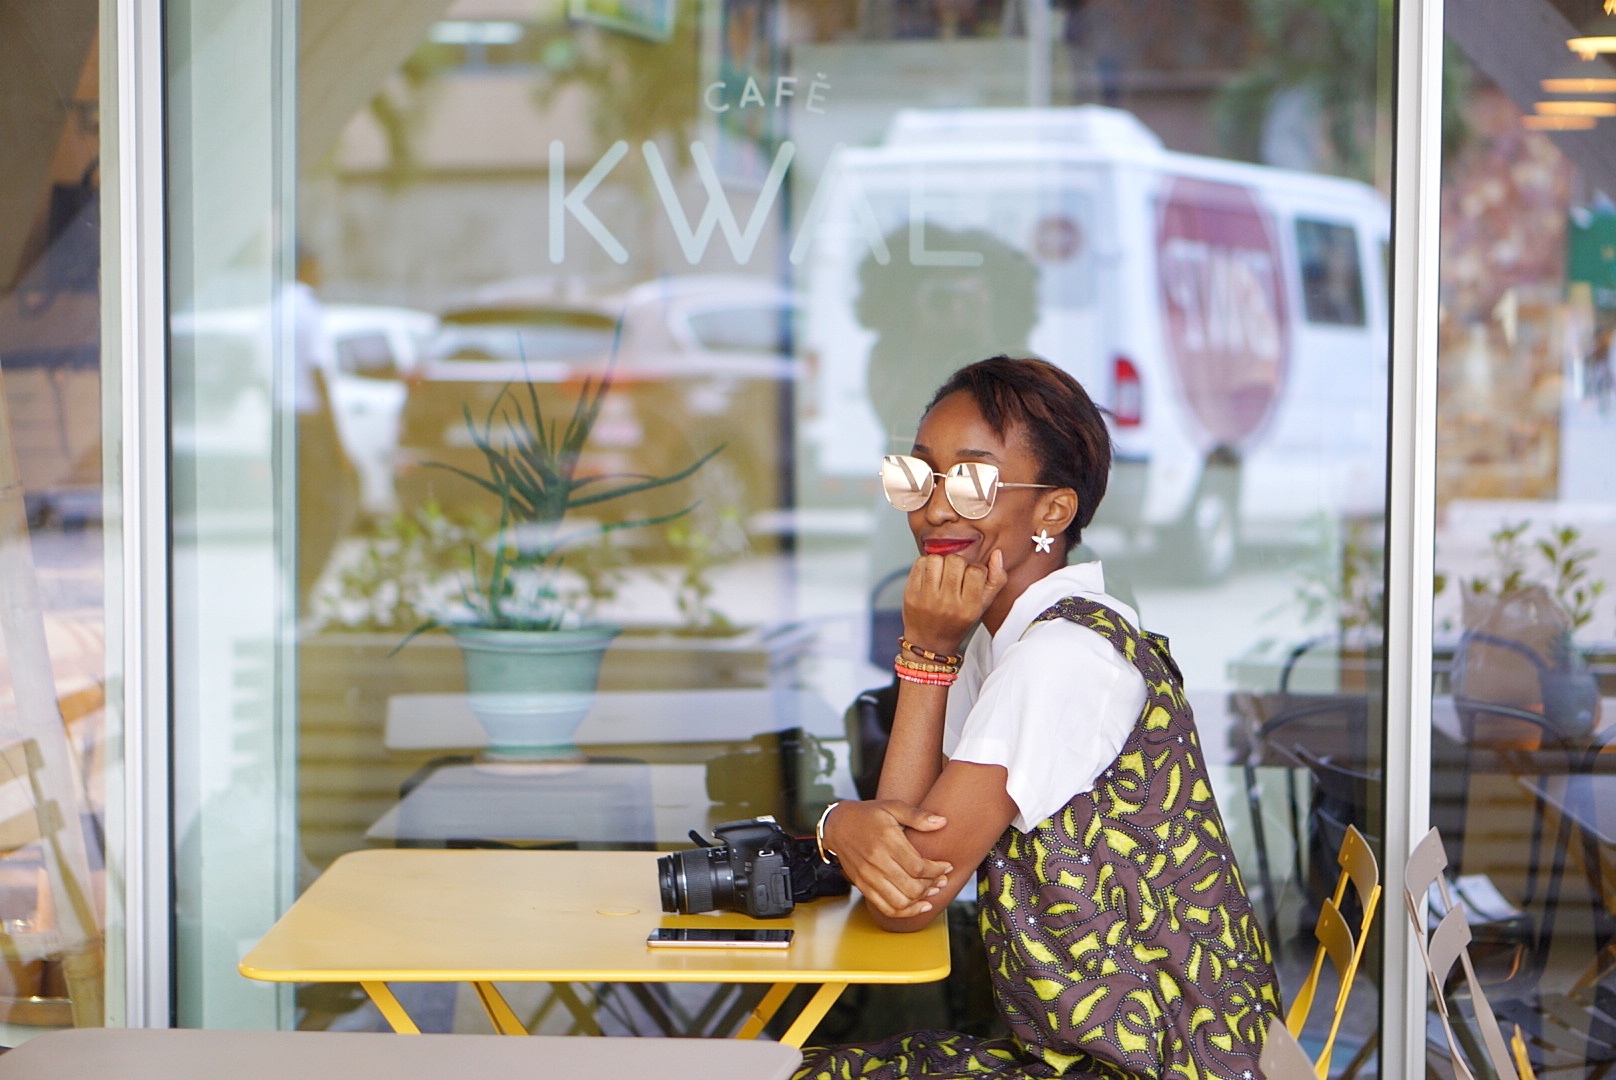 Nigerian Fashion and lifestyle blogger Cassie Daves sitting outdoor at Cafe Kwae in Accra, Ghana